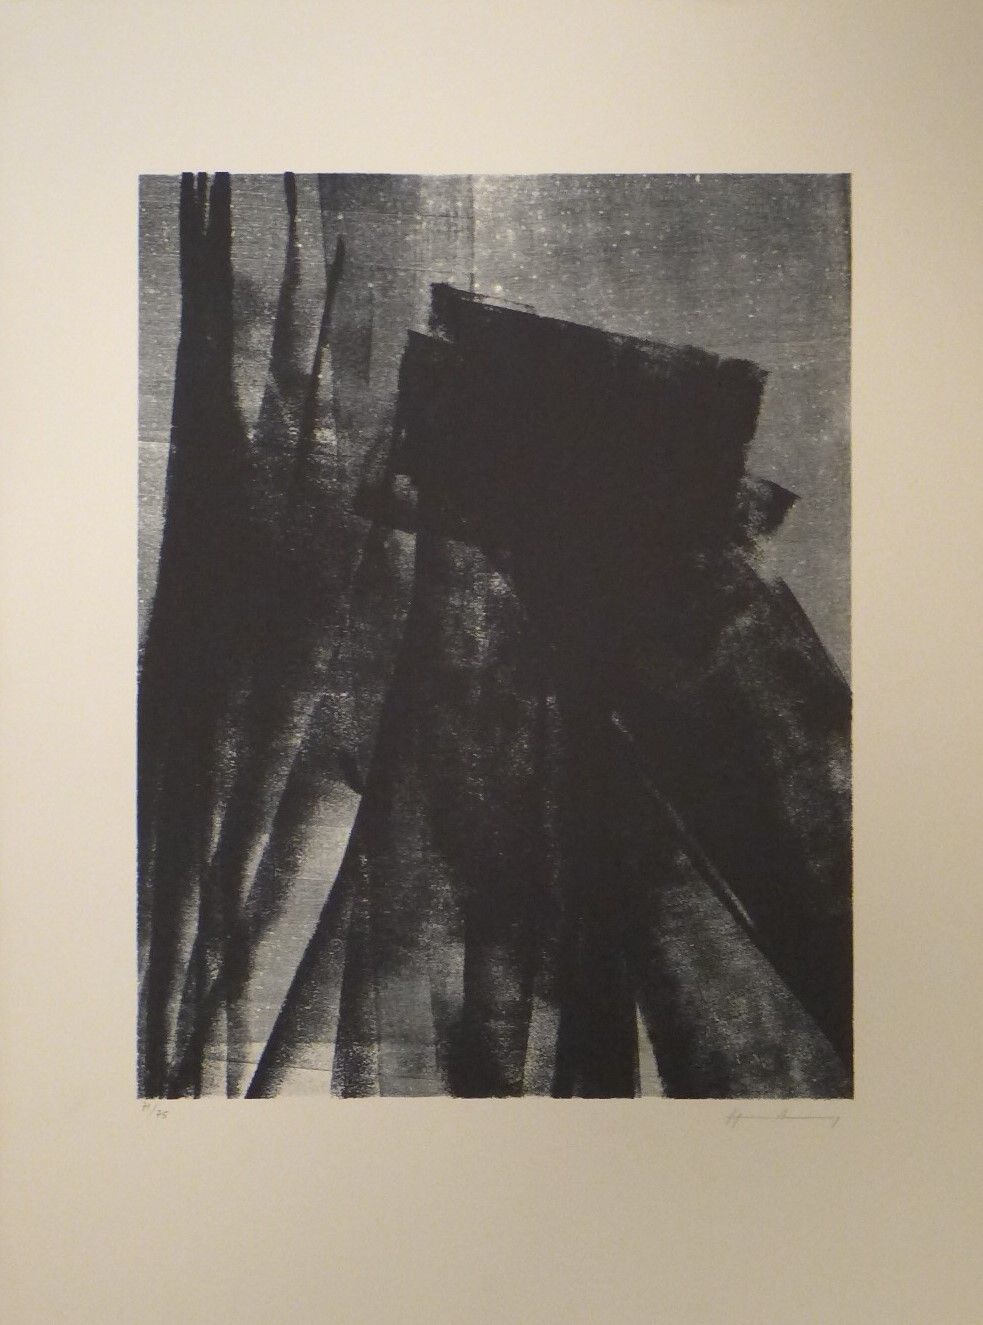 Hans Hartung Hans Hartung

AL2, 1977

Lithograph in 75 copies

Work numbered and&hellip;